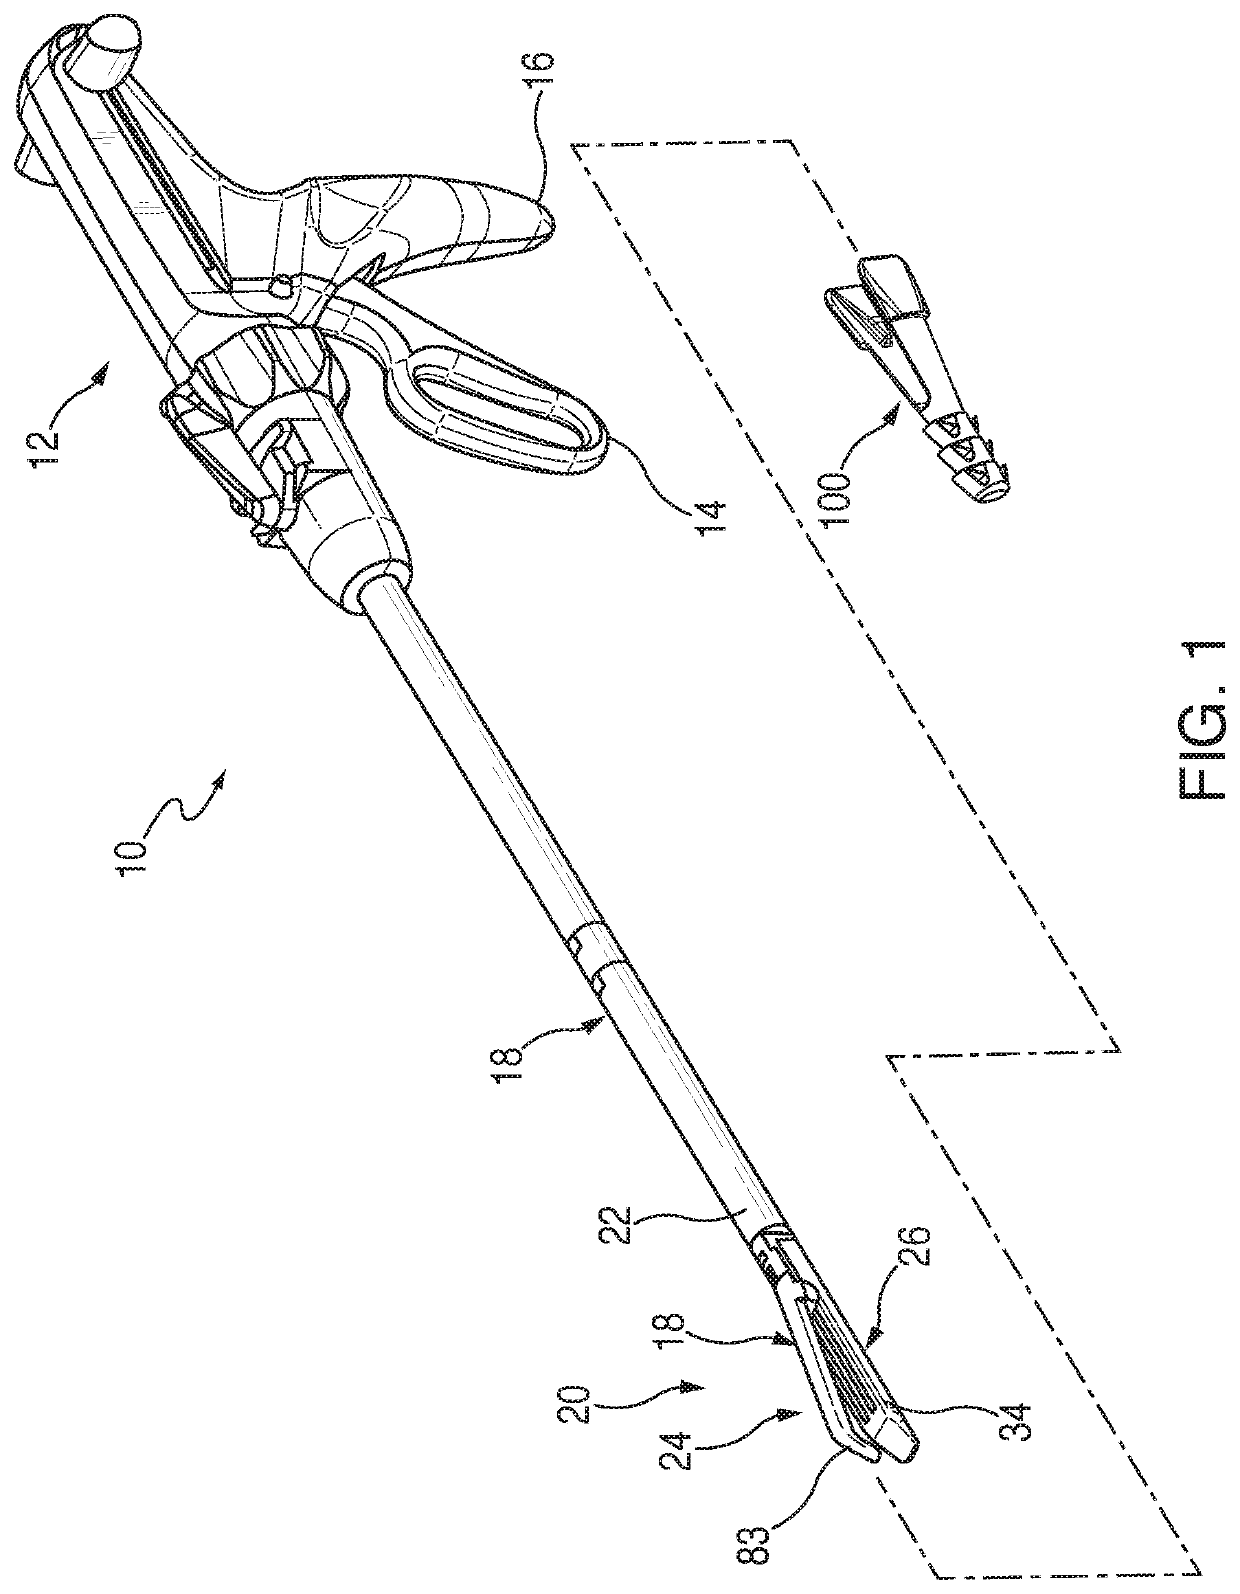 Connector clip for securing an introducer to a surgical fastener applying apparatus